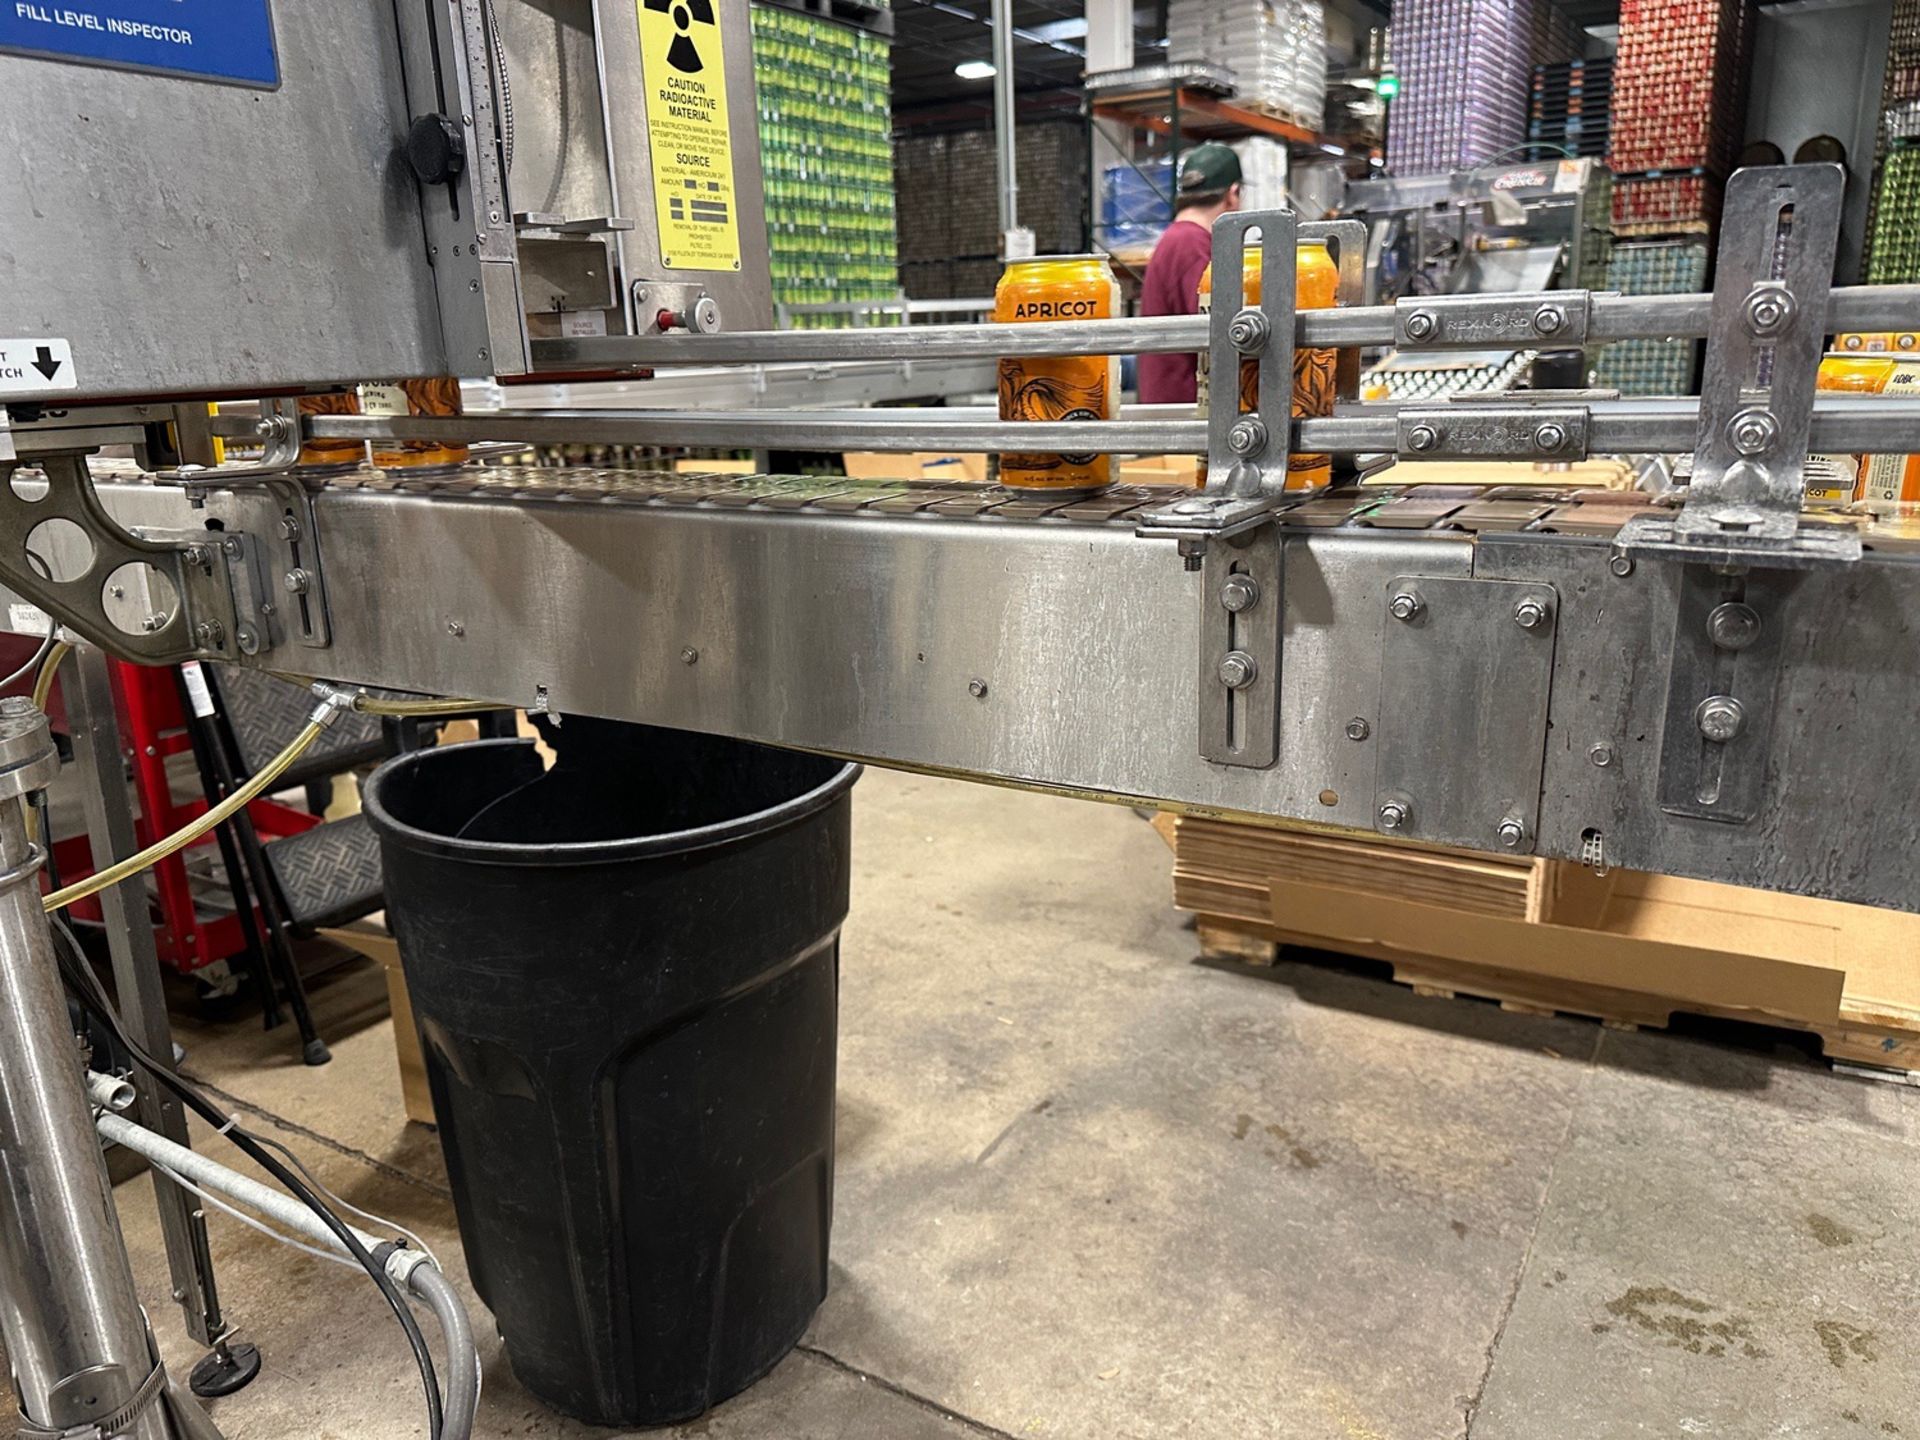 Advanced Manufacturing Technology Intralox Conveyor over Stainless Steel Frame with | Rig Fee $450 - Image 2 of 7